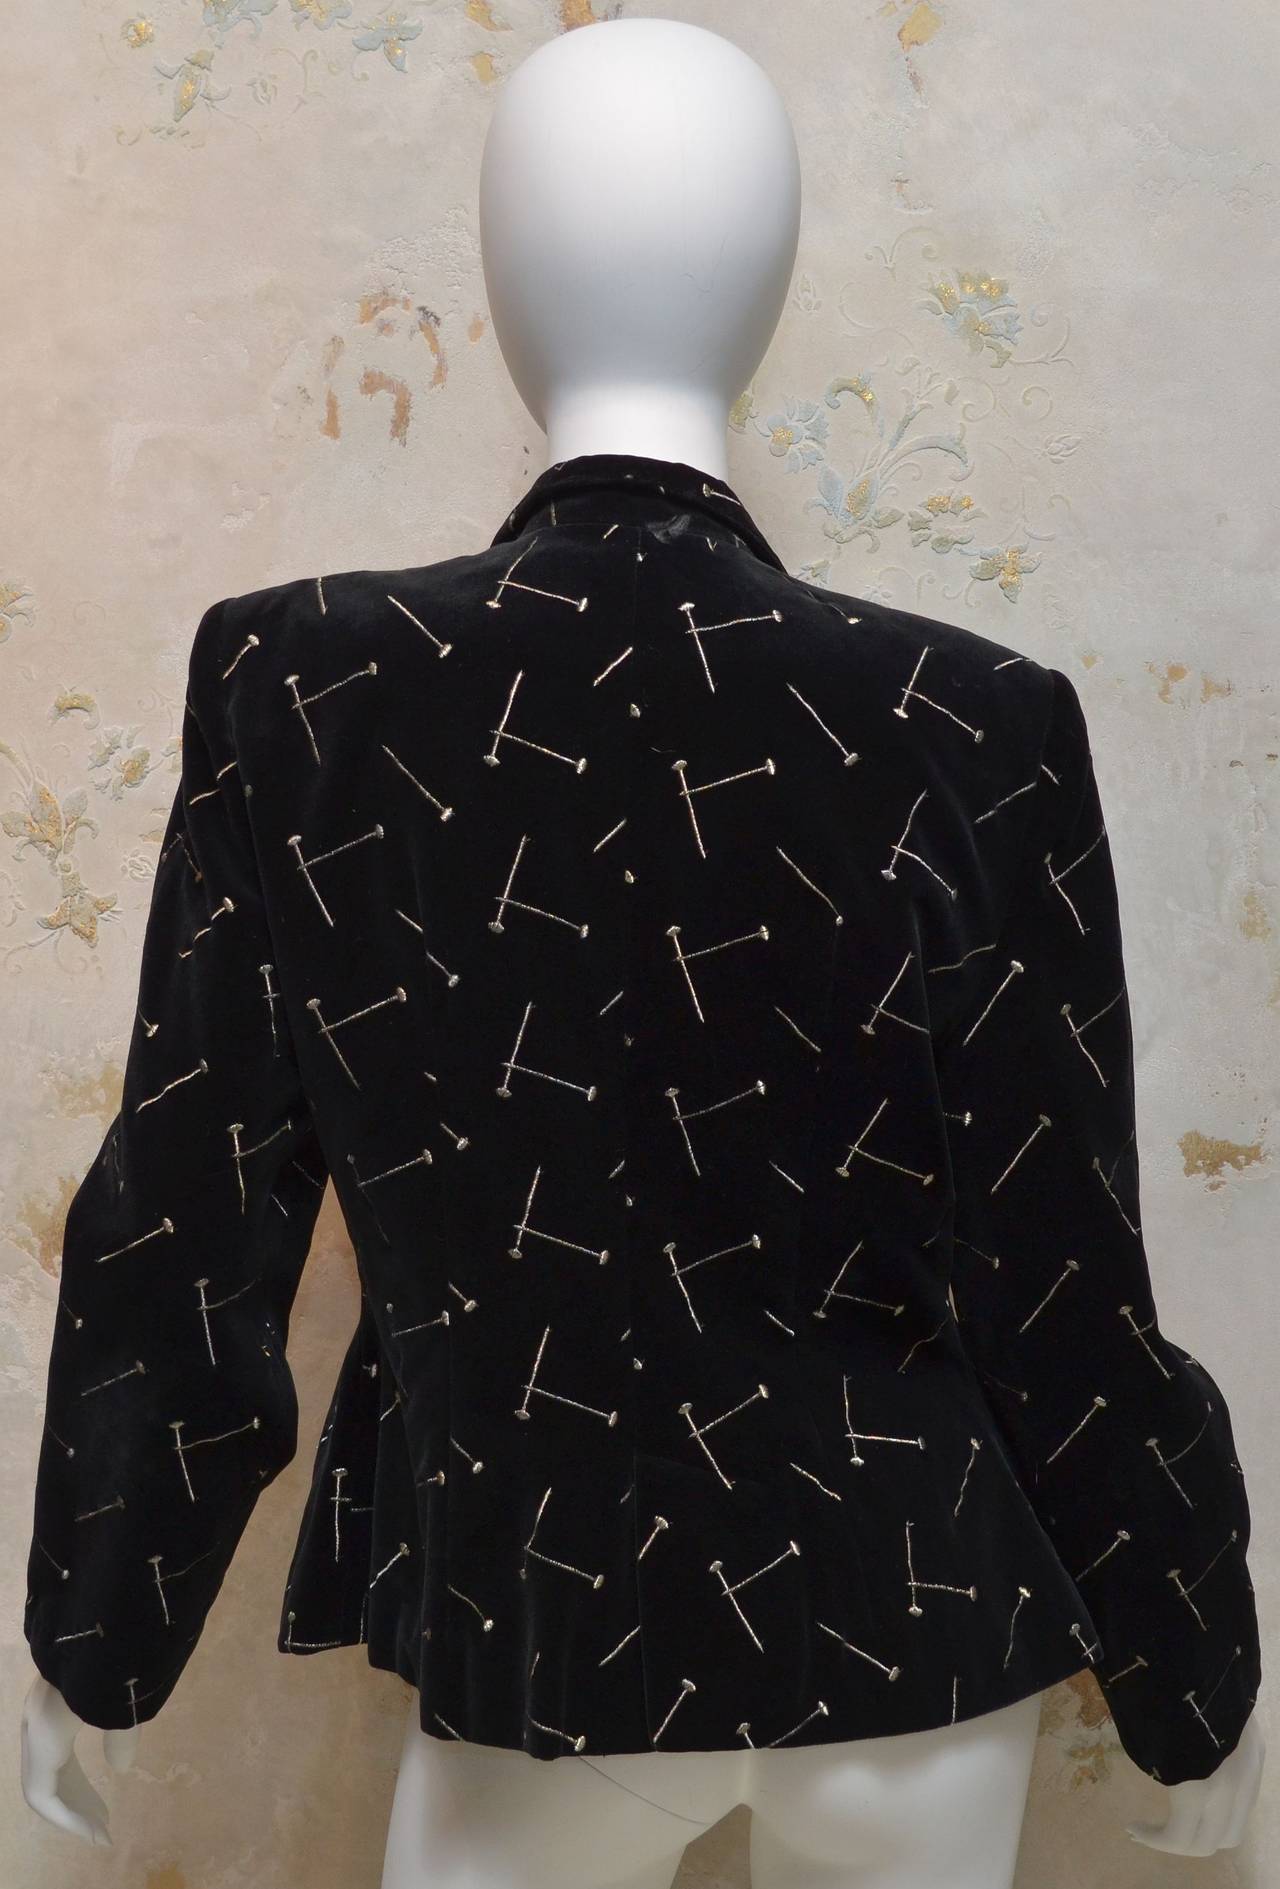 Patrick Kelly black velvet blazer embroidered with a flat head nail pattern in gold thread. Nail shaped metal buttons at front closure.Blazer is fully lined. Made in France.

Measurements:
Bust - 38''
Sleeves - 24''
Shoulders - 17''
Length -